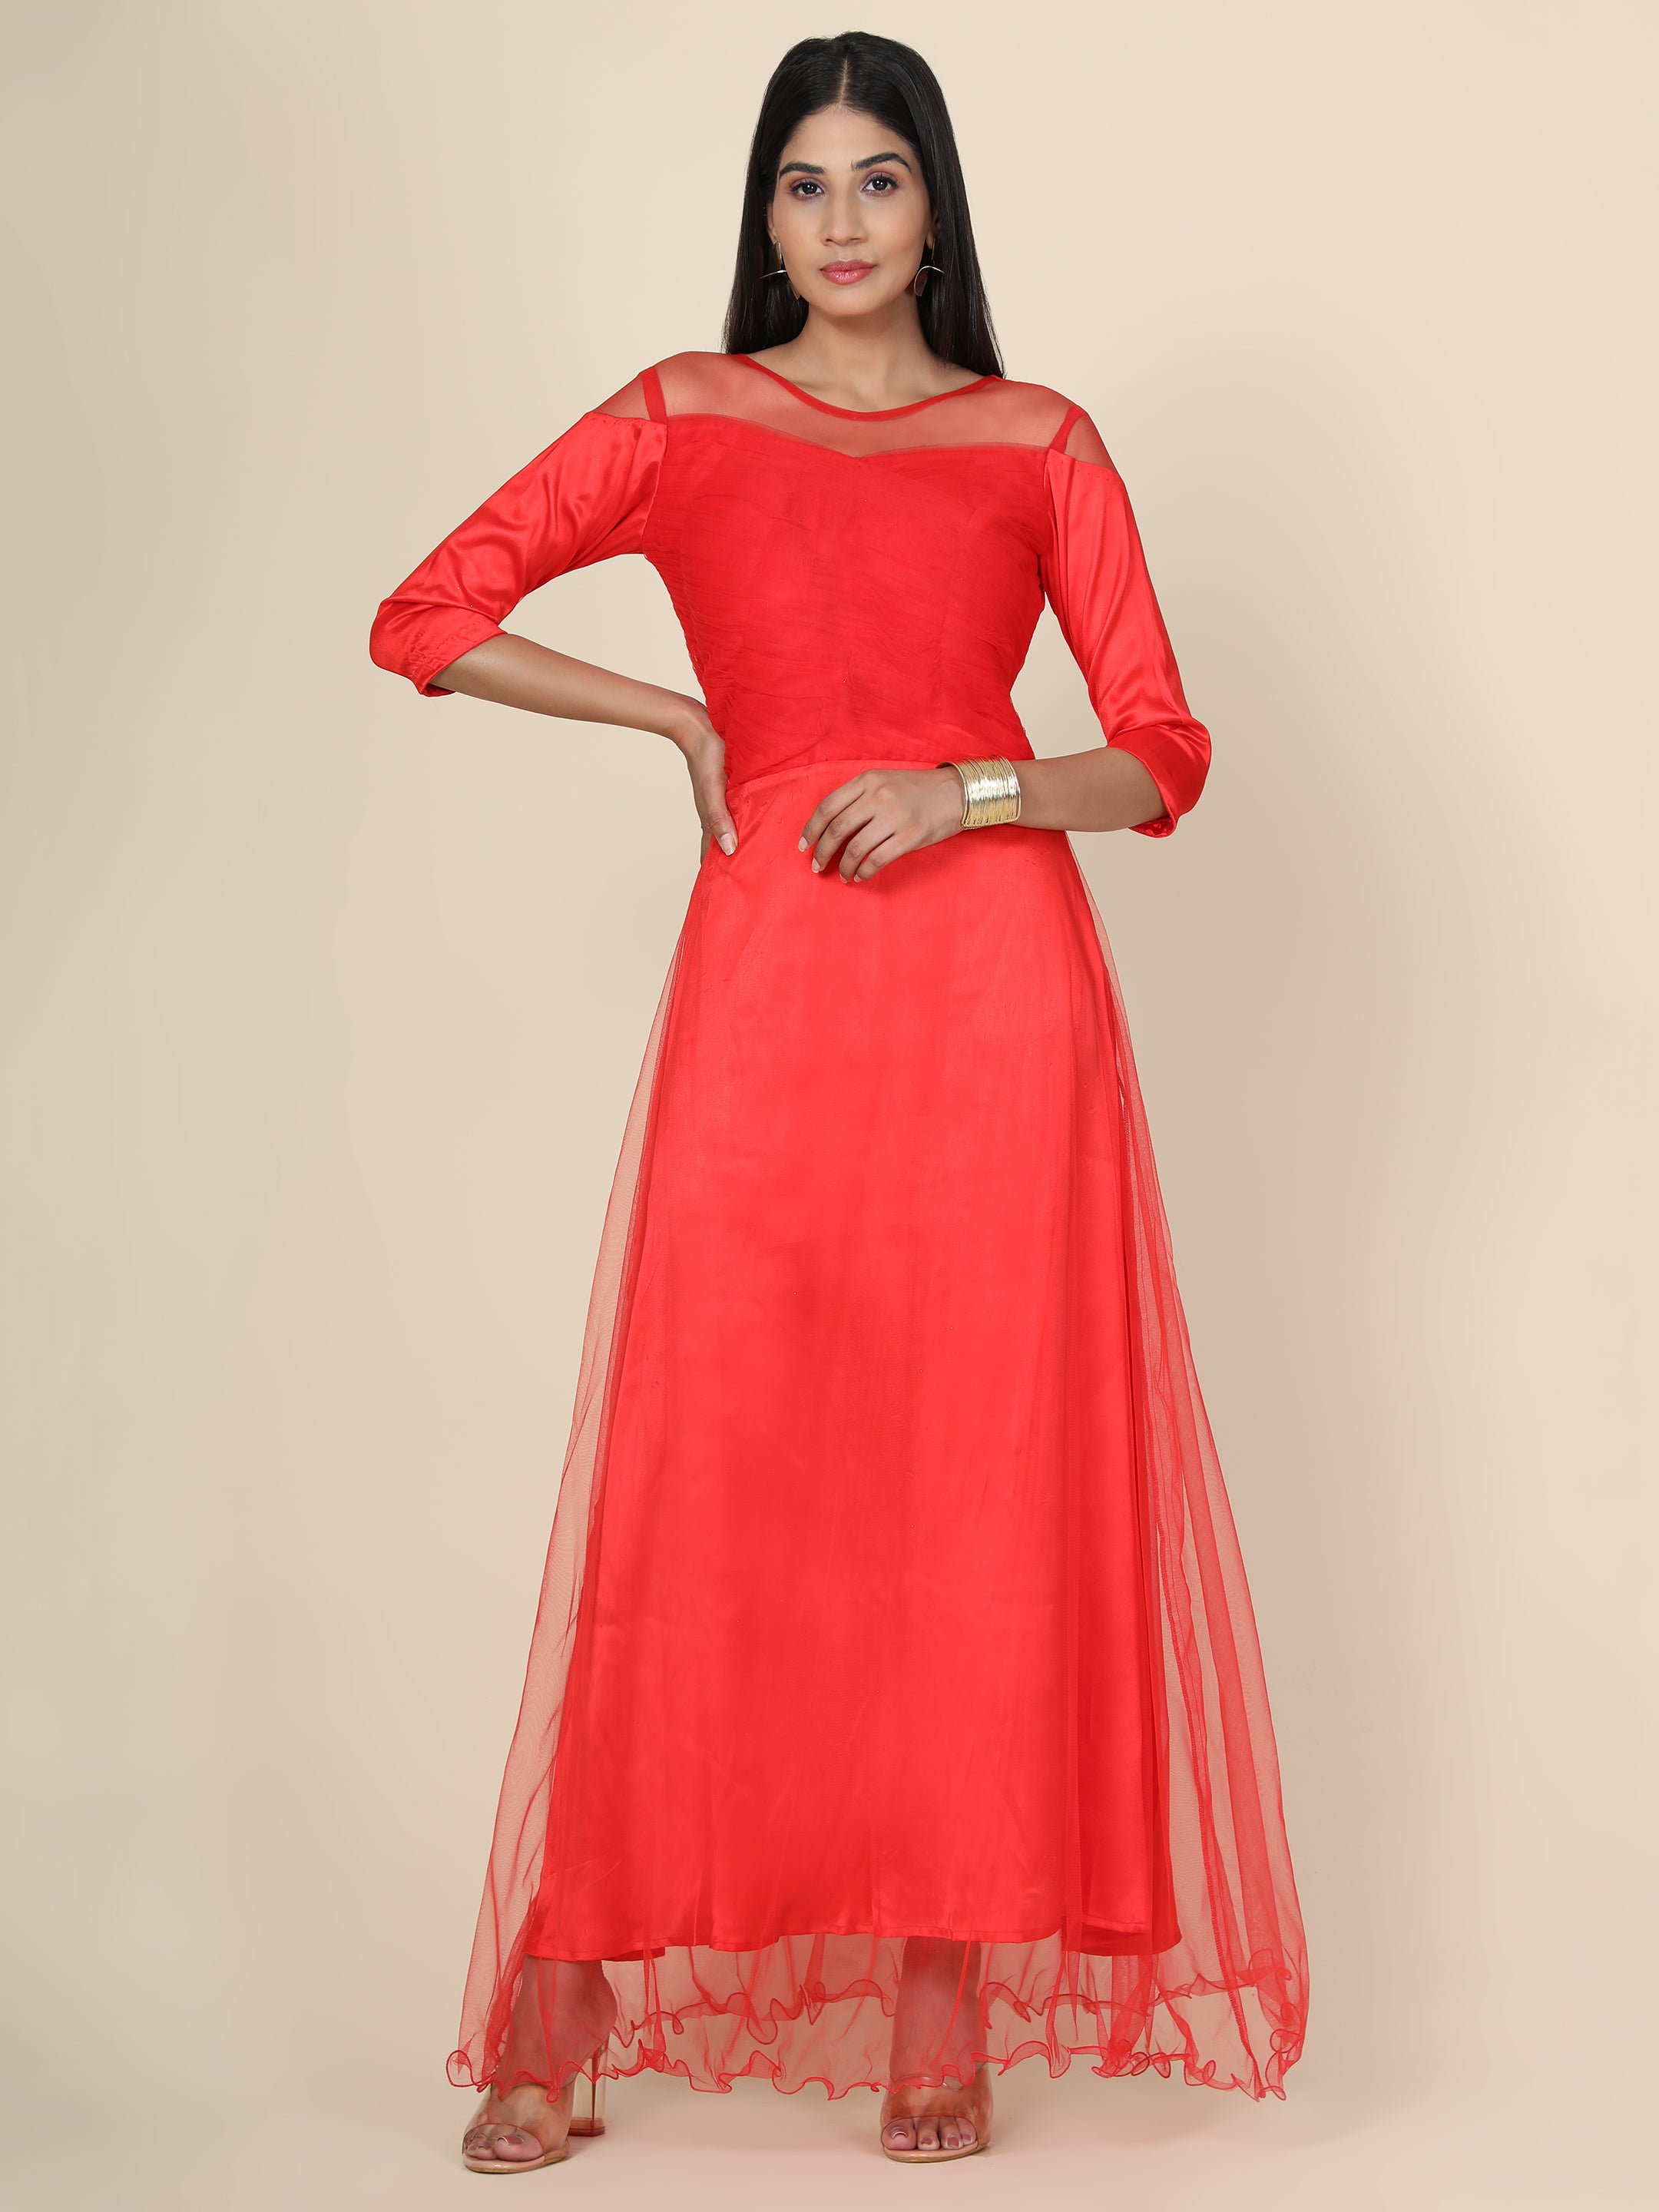 Women's Pleat Draped Red Gown - MIRACOLOS by Ruchi